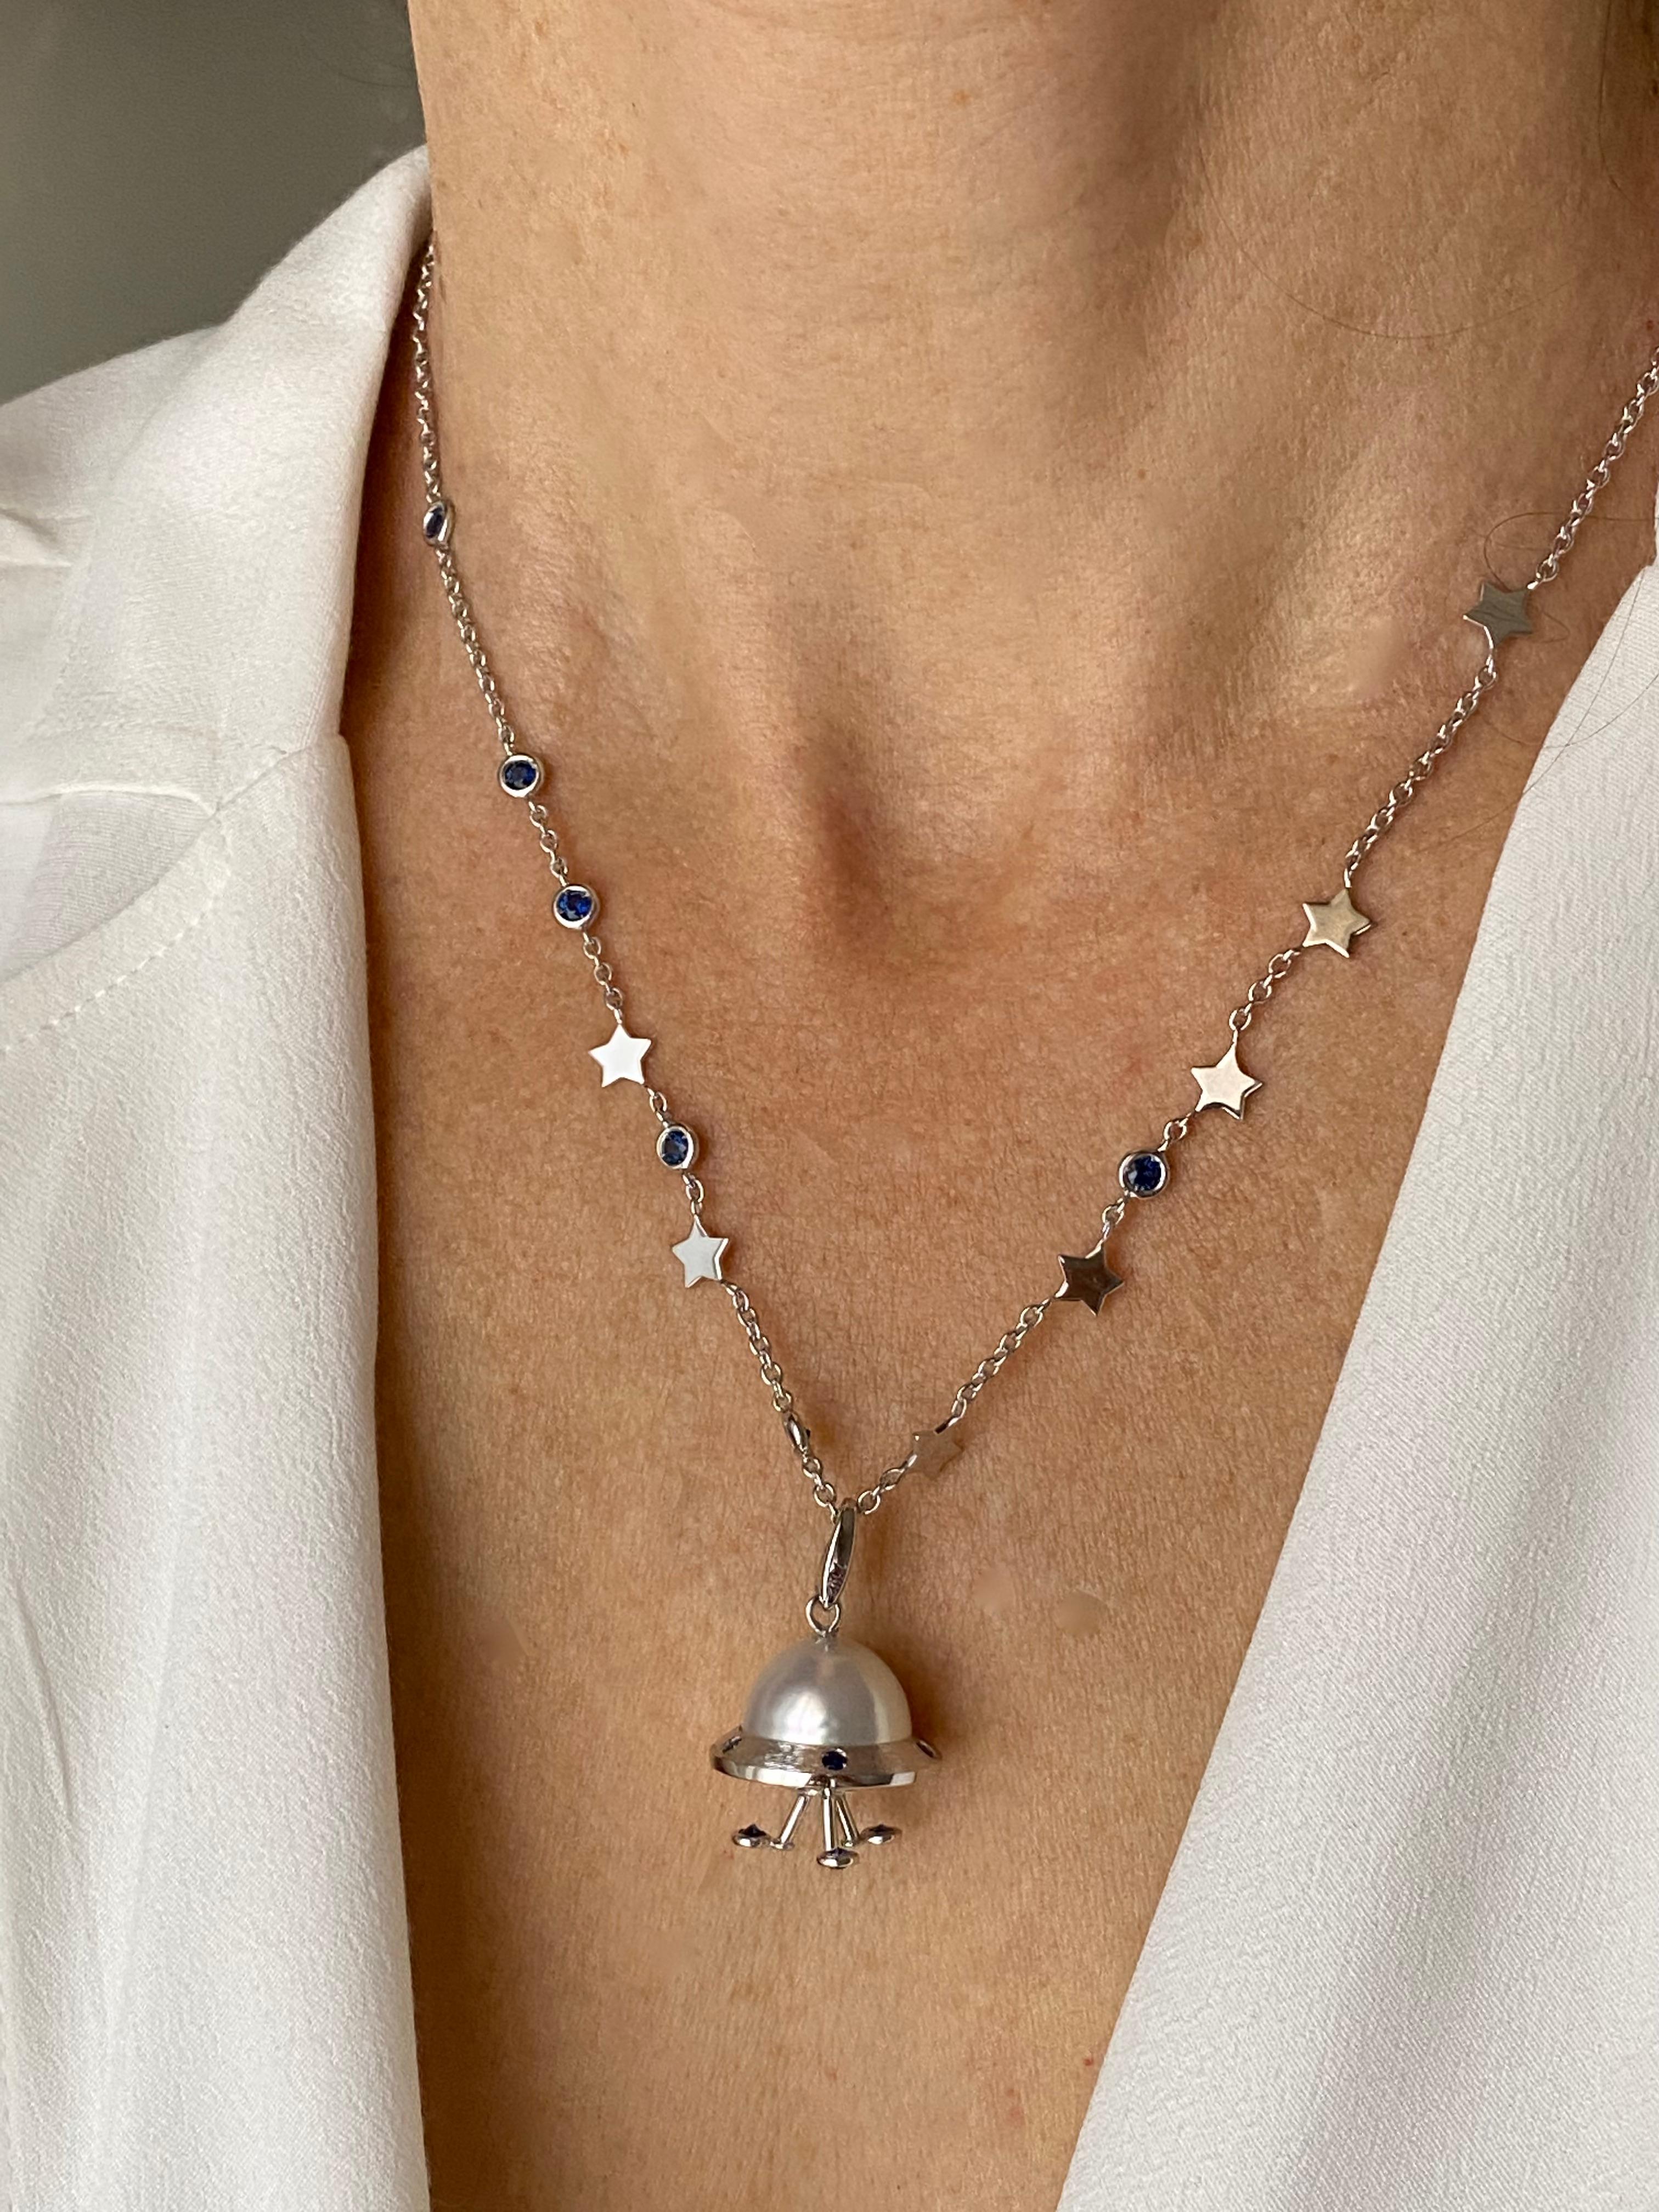 Flying Saucer Blue Sapphire Australian Pearl 18KT Gold Pendant Necklace or Charm 7